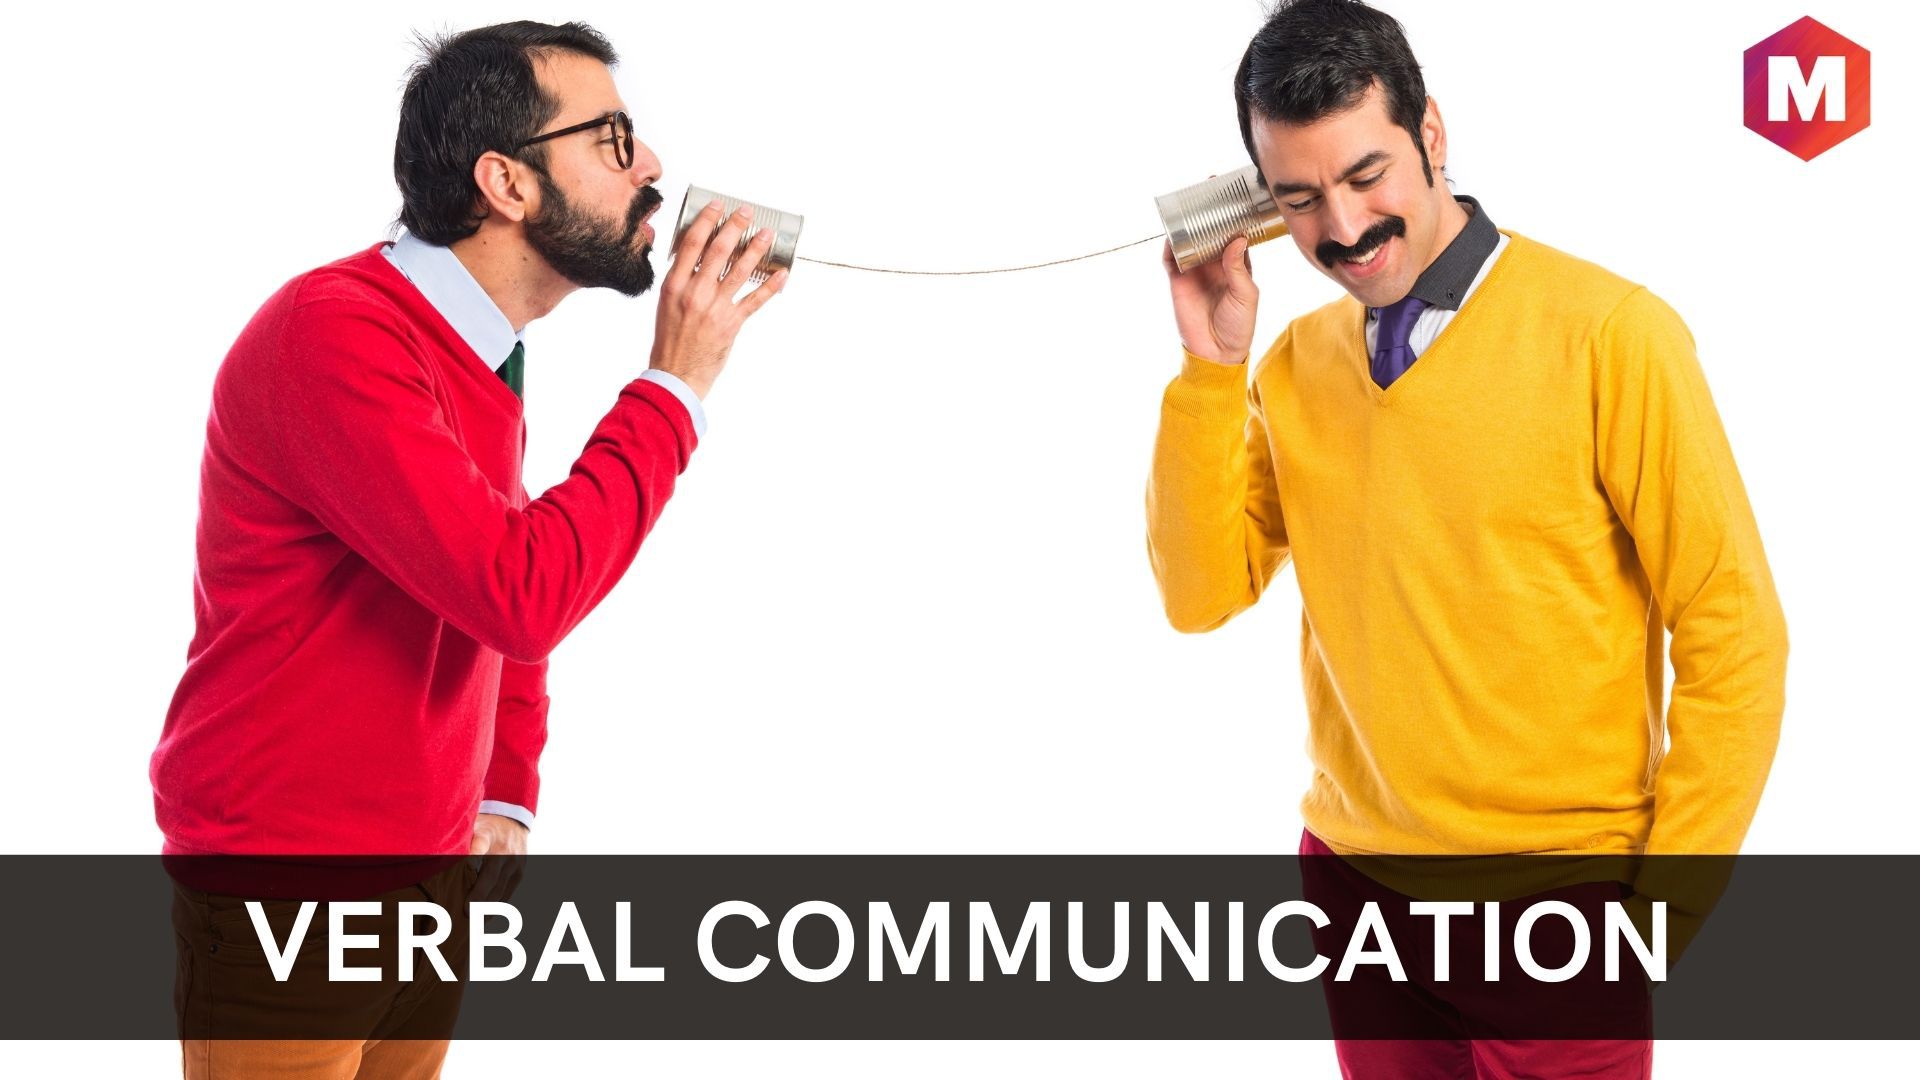 Verbal Communication - Definition, Types, Importance and Difference ...